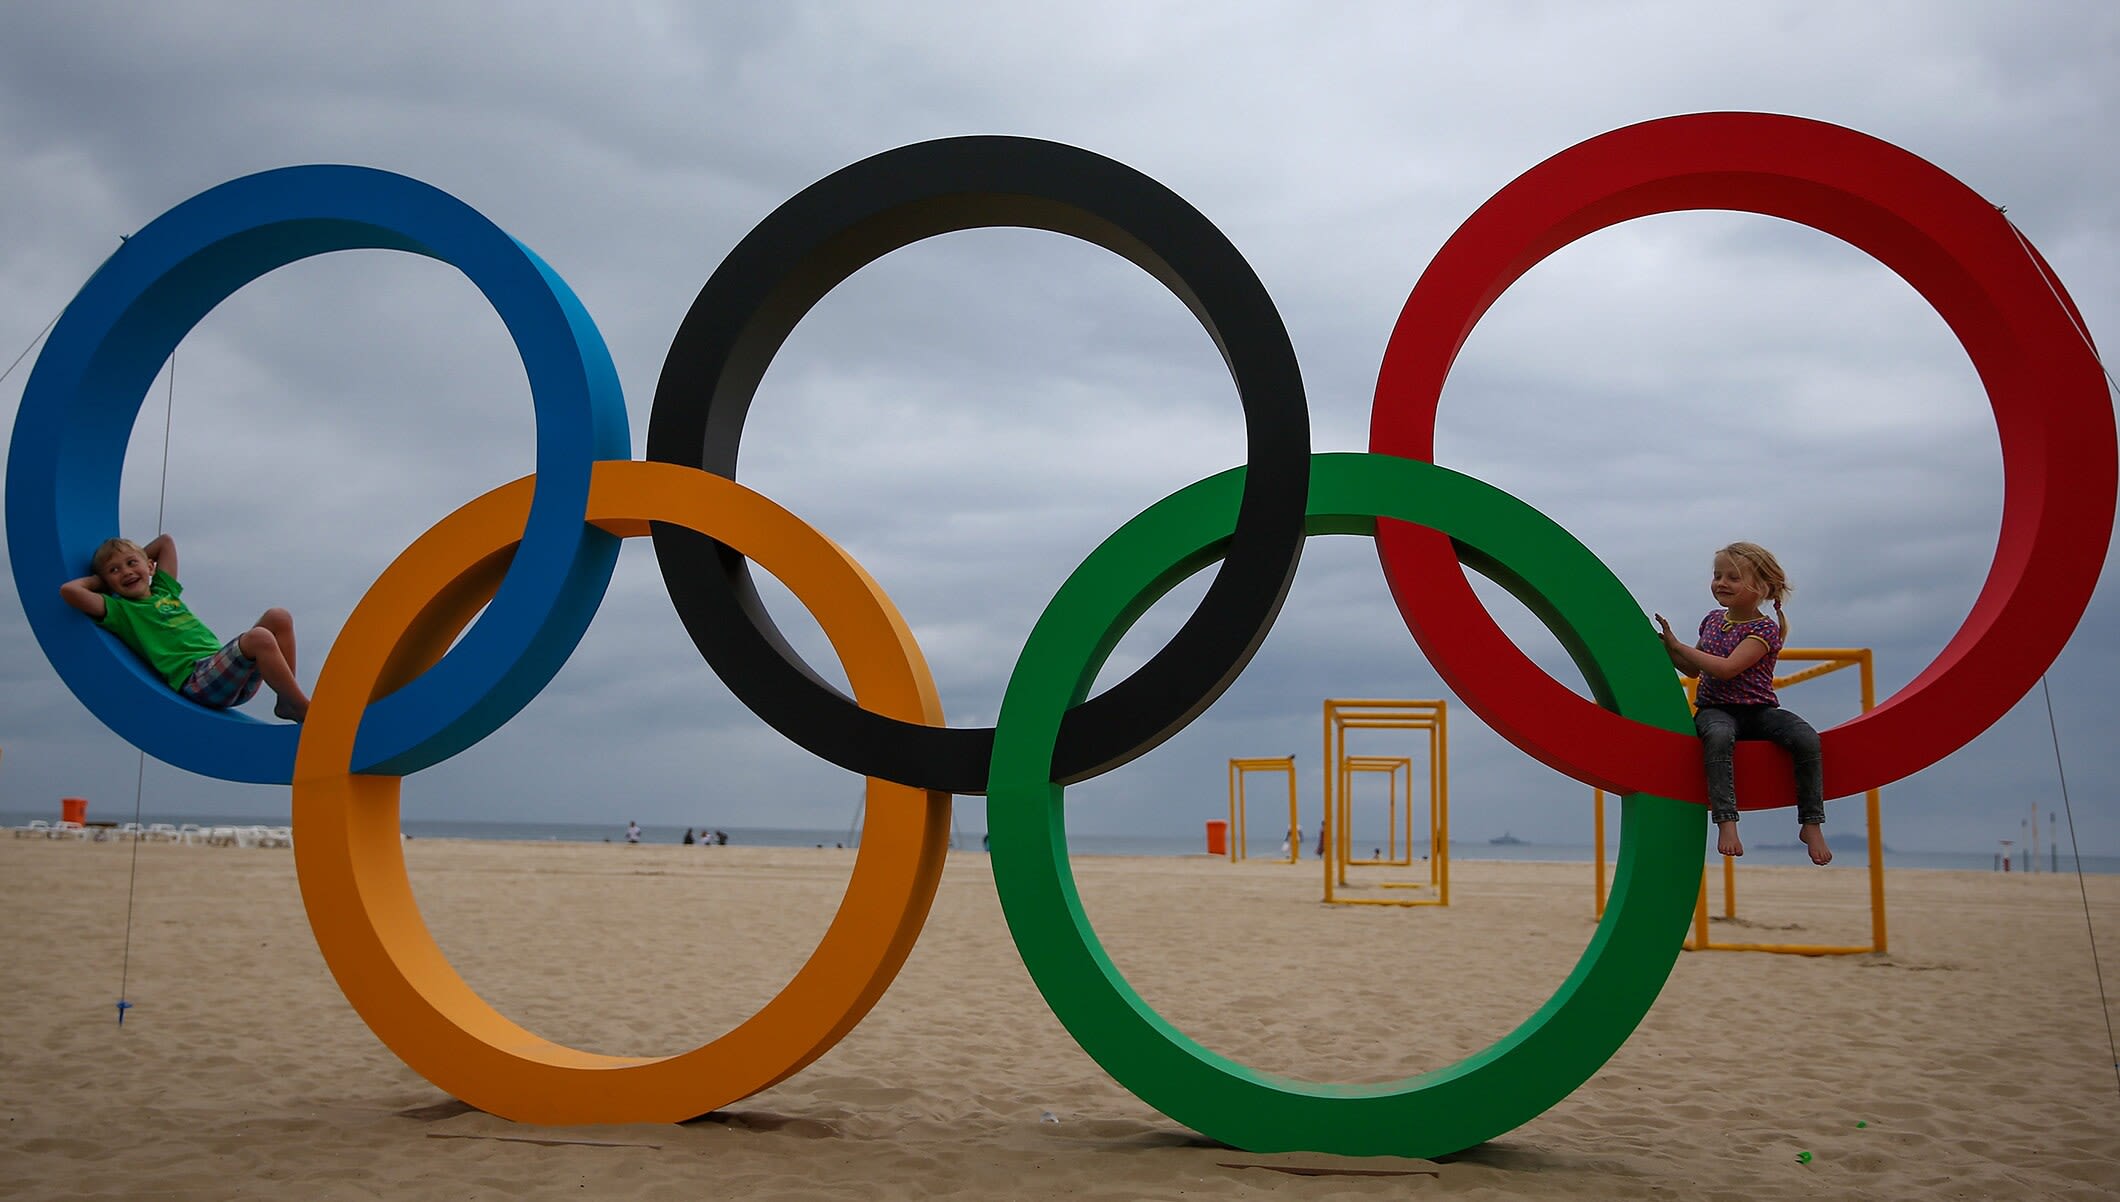 Rio 2016 will bring a taste of Brazil to host city - Olympic News